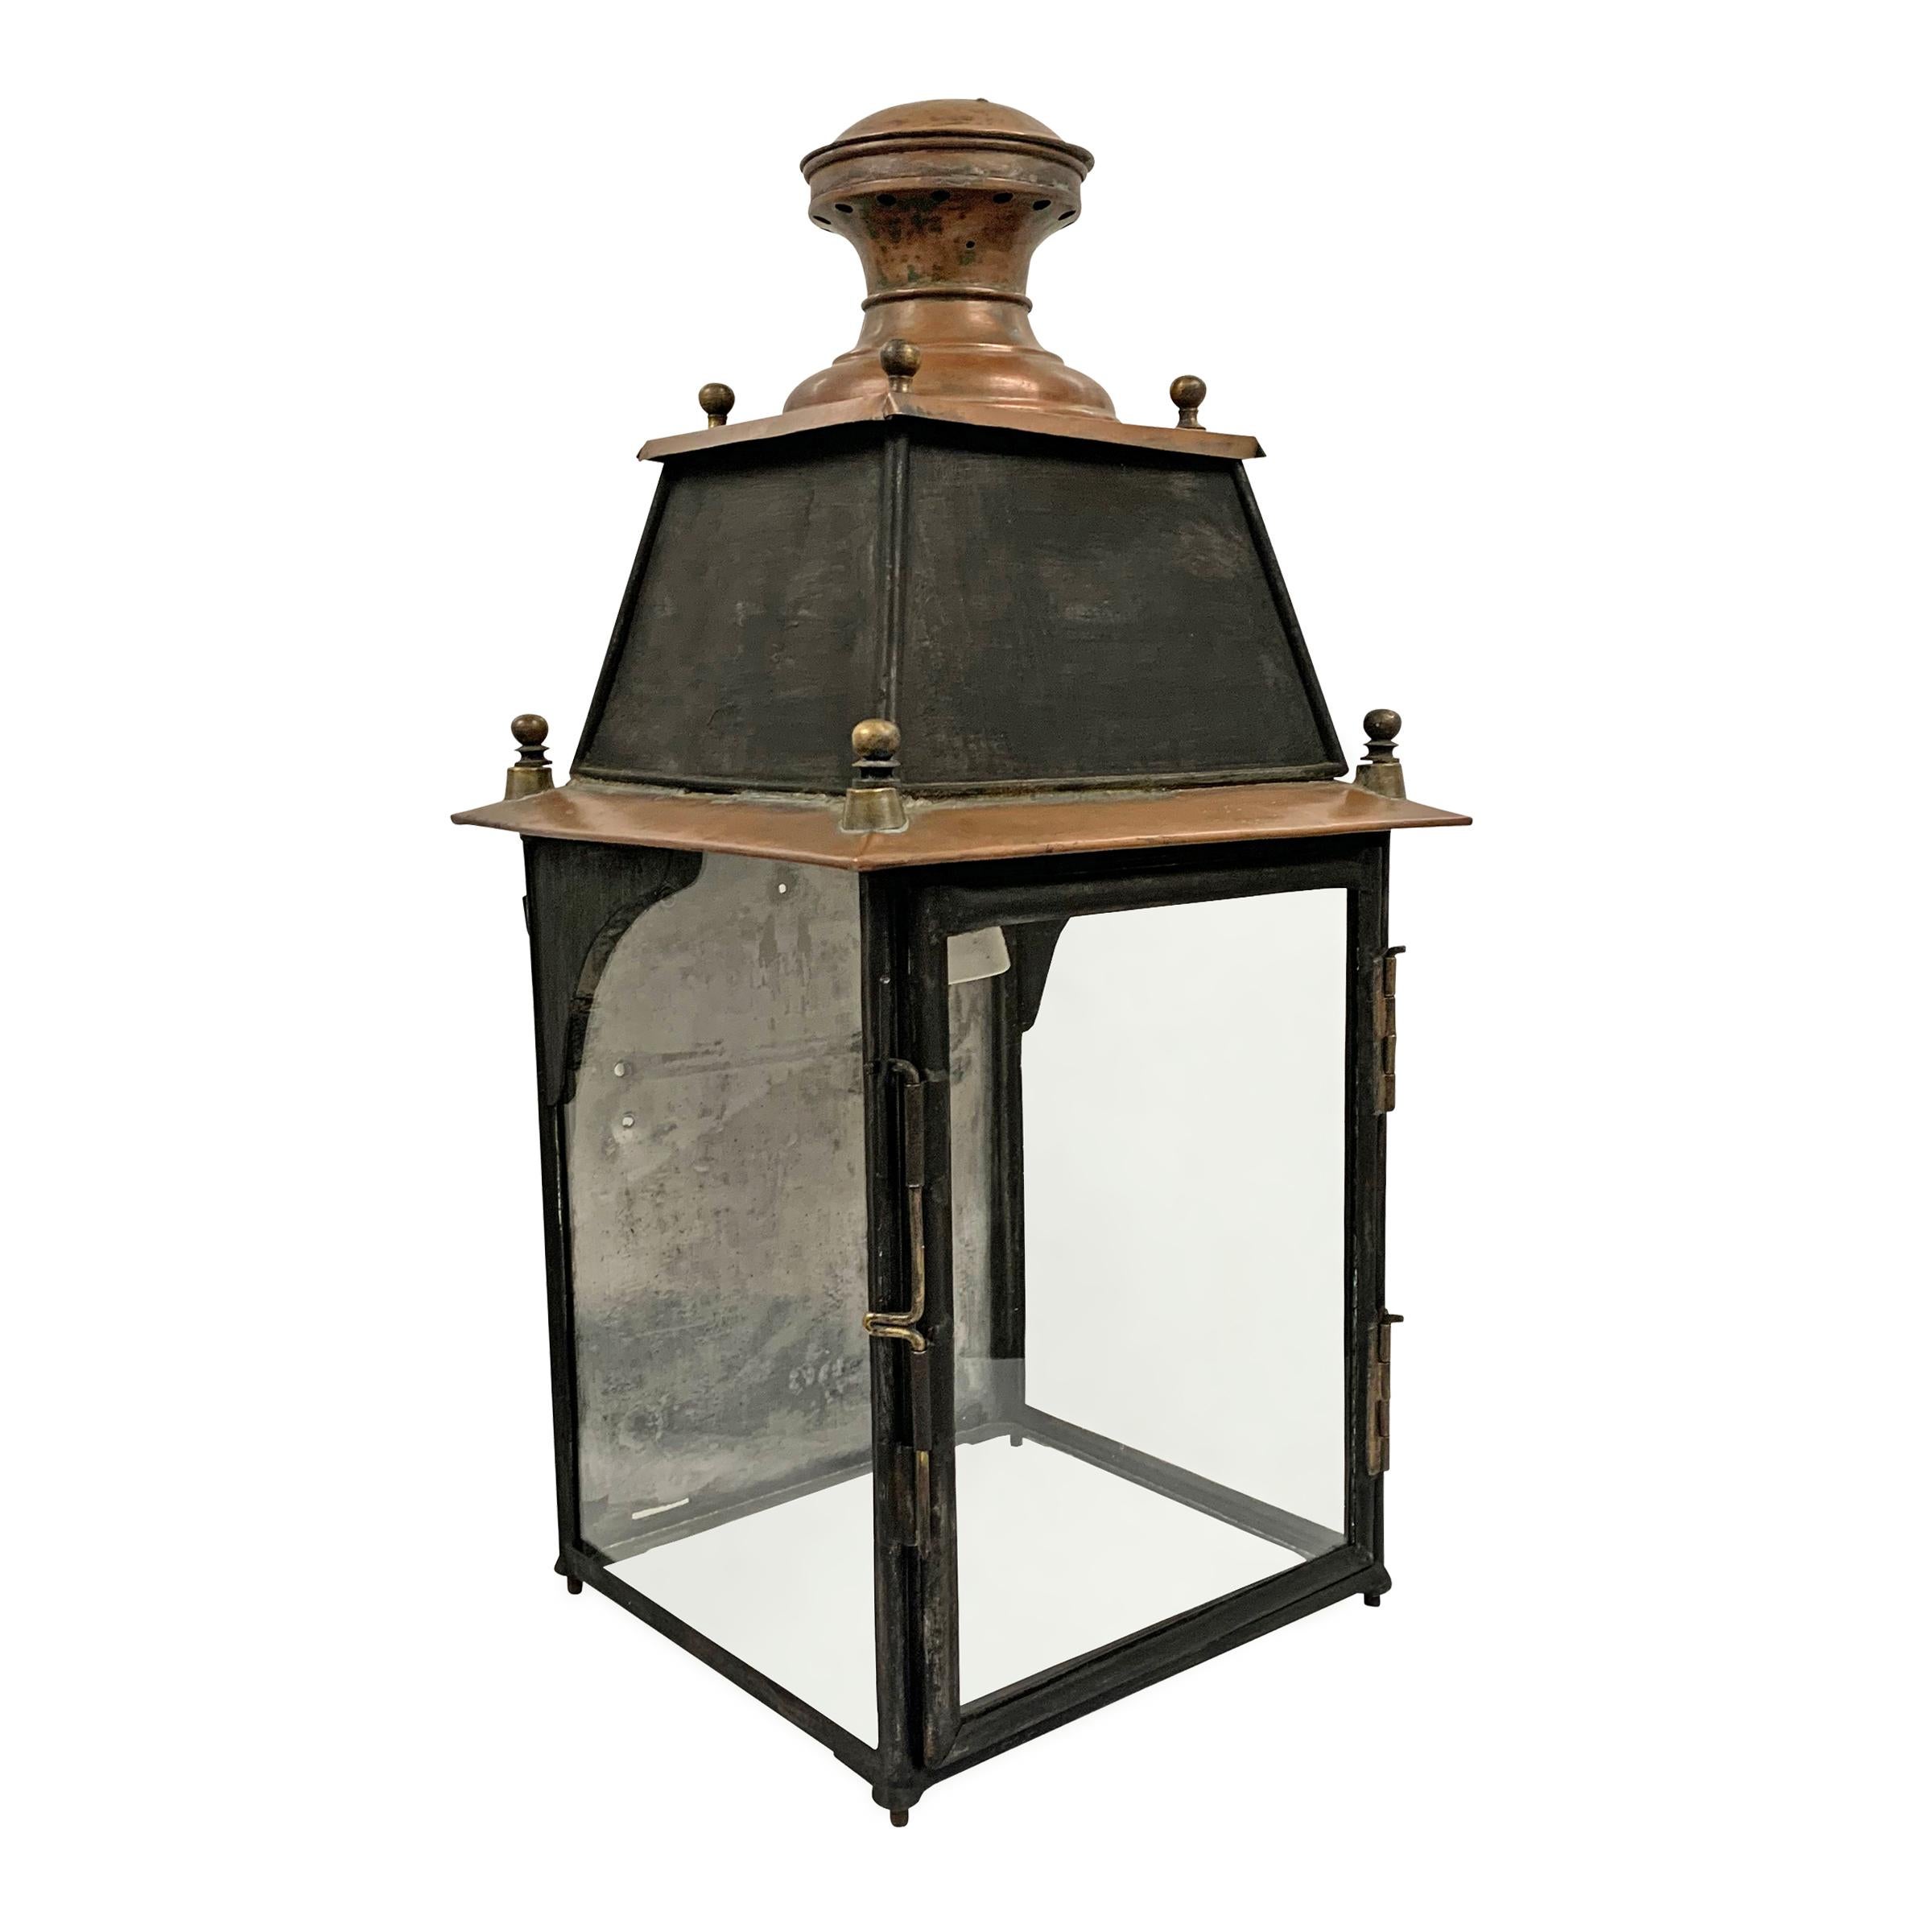 A charming 19th century French copper wall-mount lantern from a train station with a tall “mansard-style” roof with a round copper finial, and glass side panels, bottom, and door. Designed to be hung on a wall, but can also be used on a table.